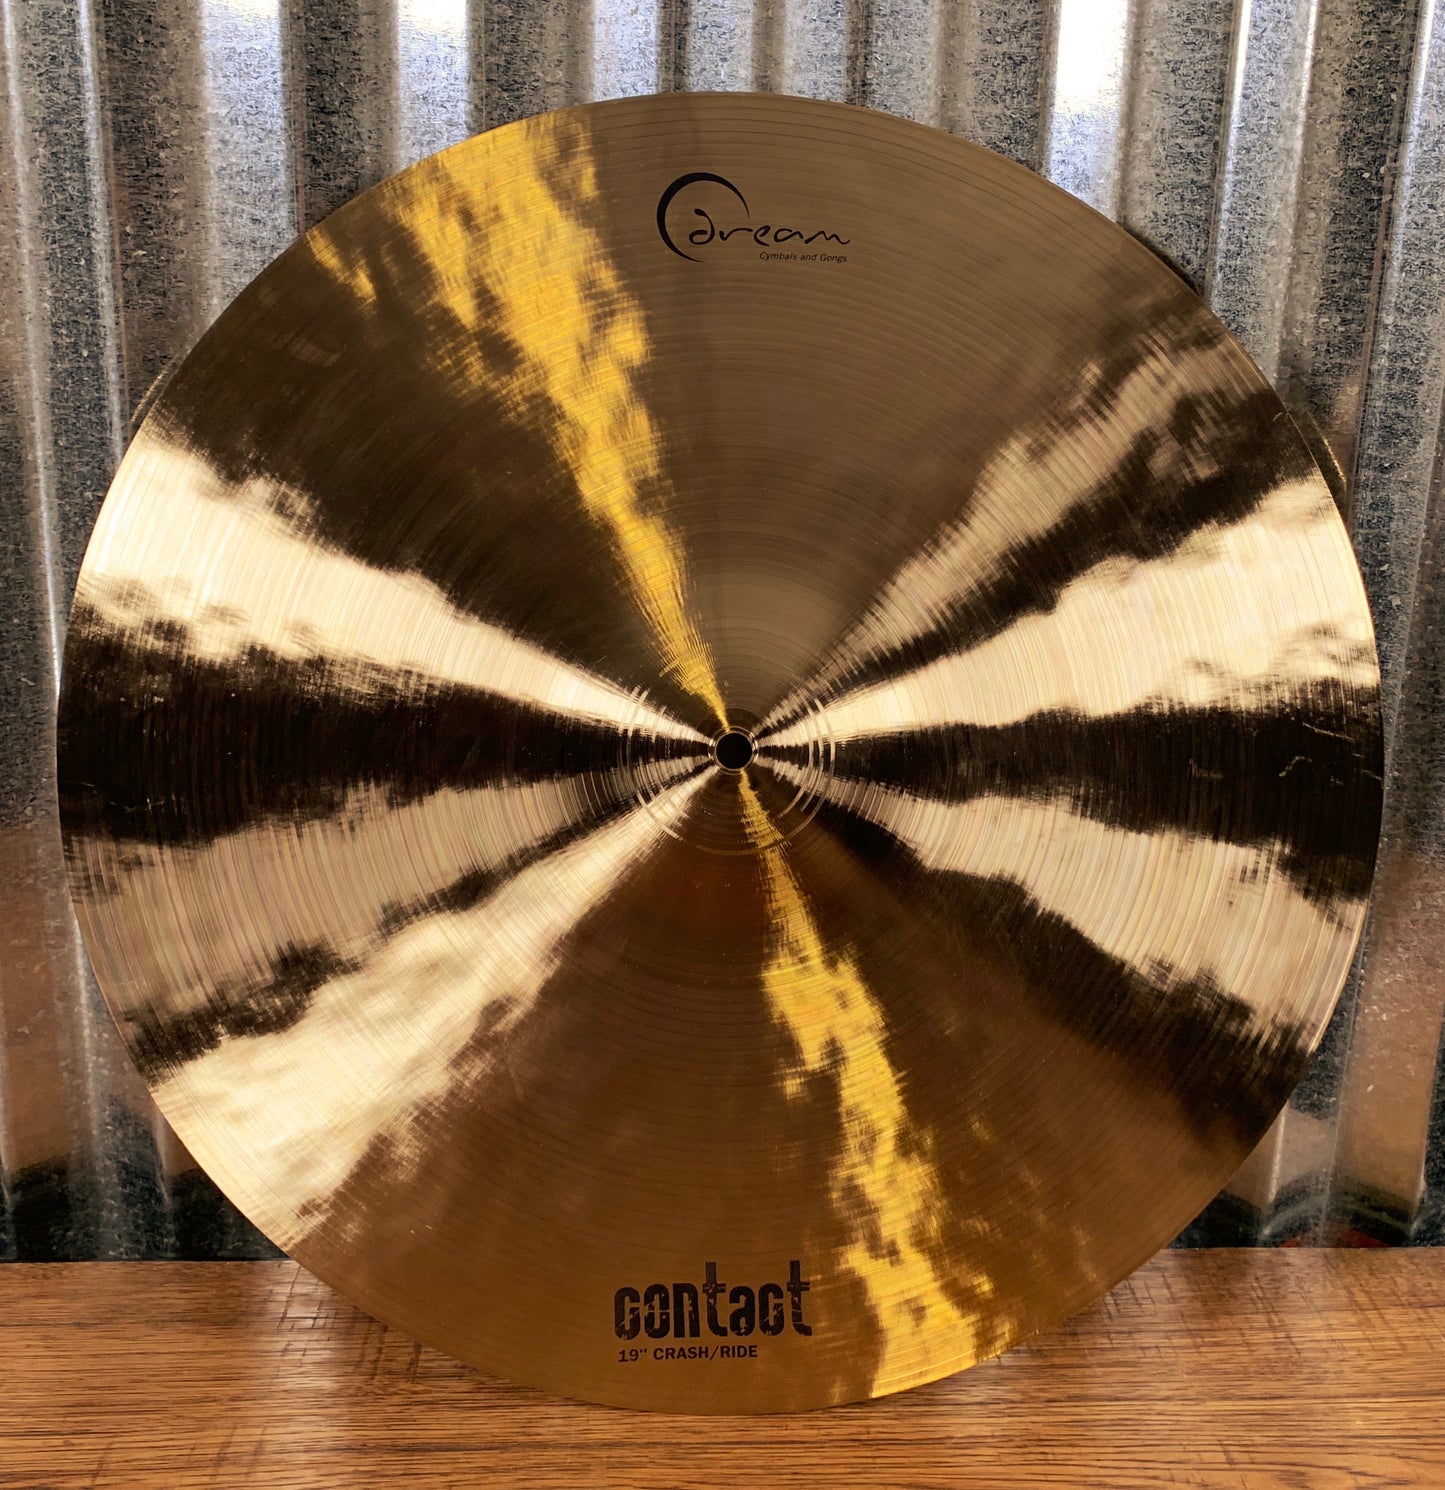 Dream Cymbals C-CRRI19 Contact Series Hand Forged & Hammered 19" Crash Ride Demo